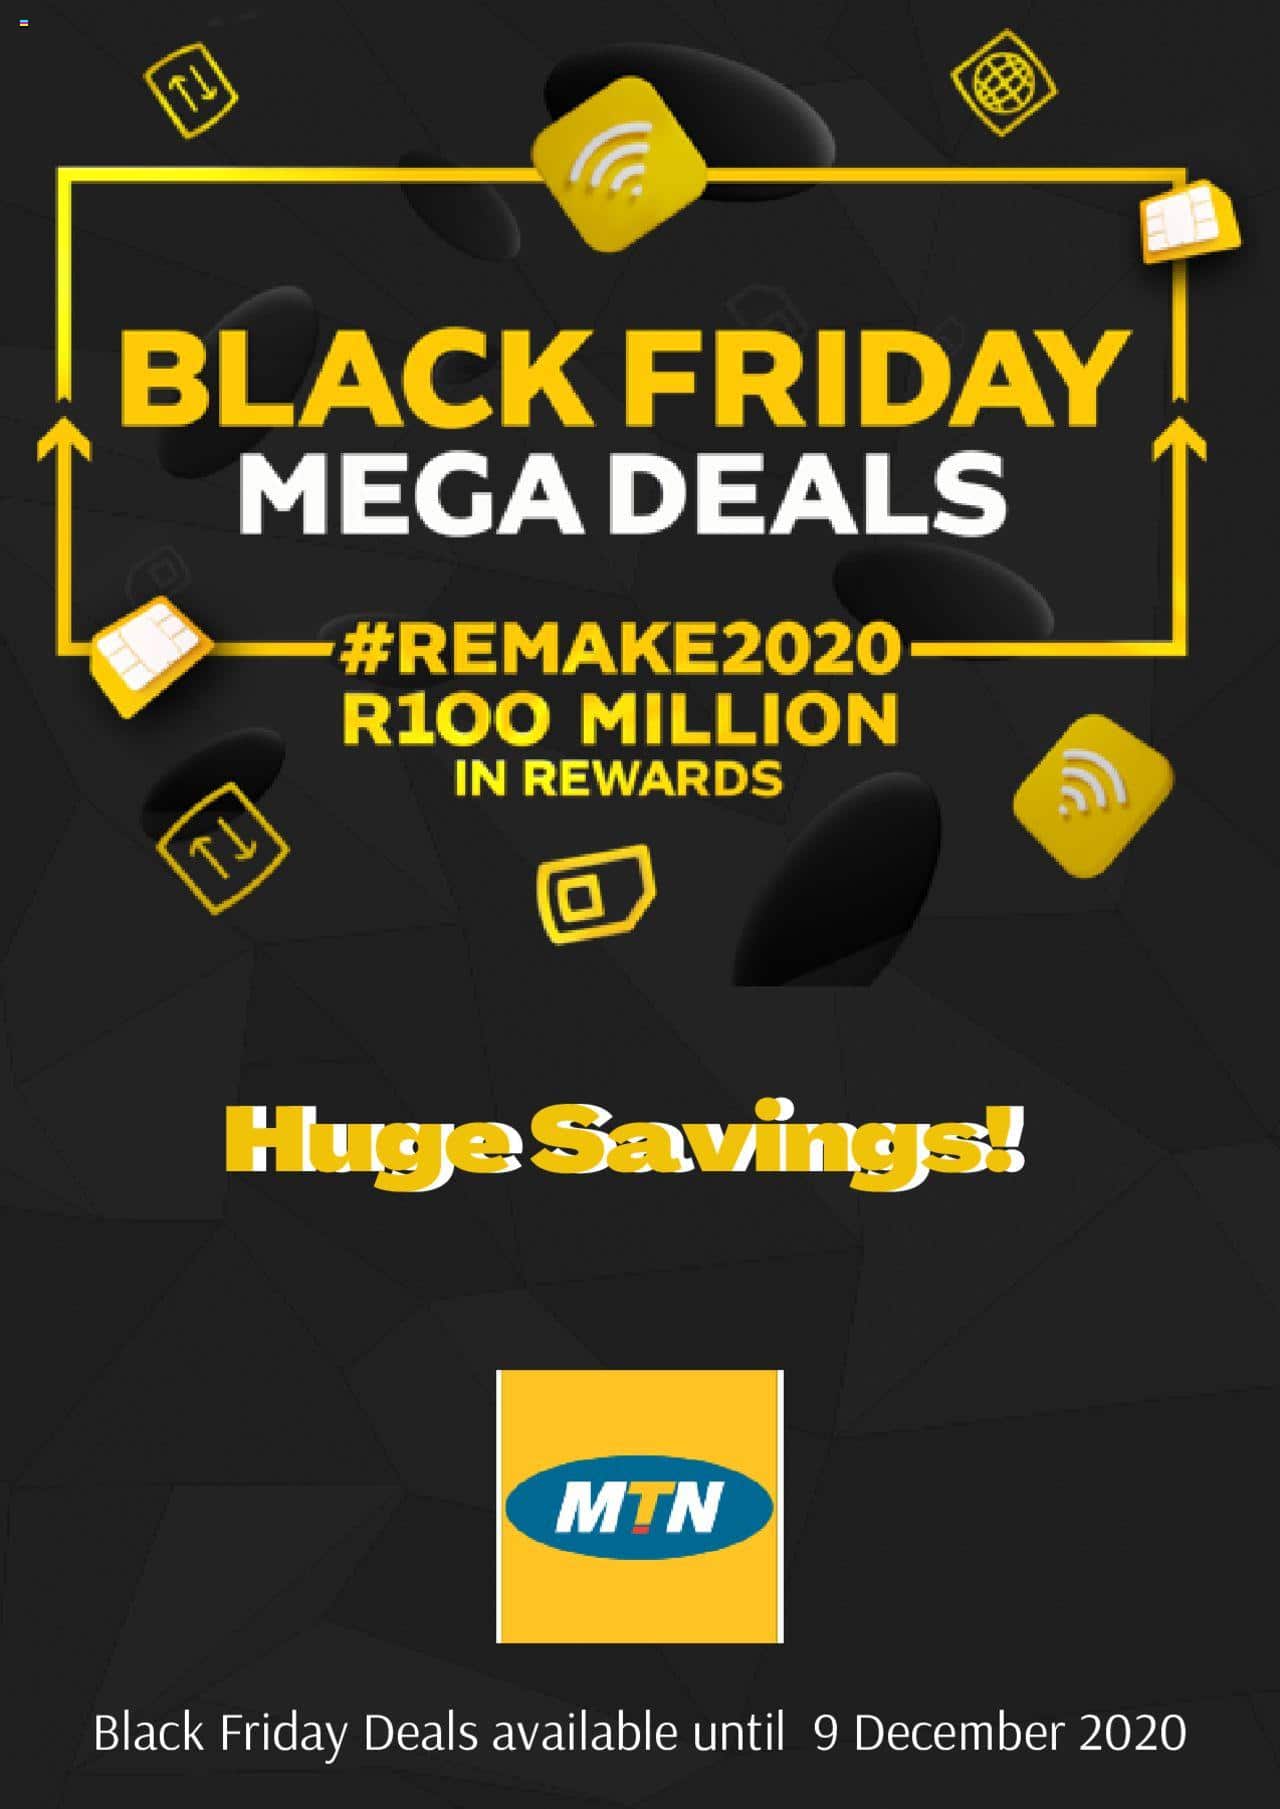 MTN Black Friday Deals & Specials 2021 - Will Be Black Friday Deals This Year